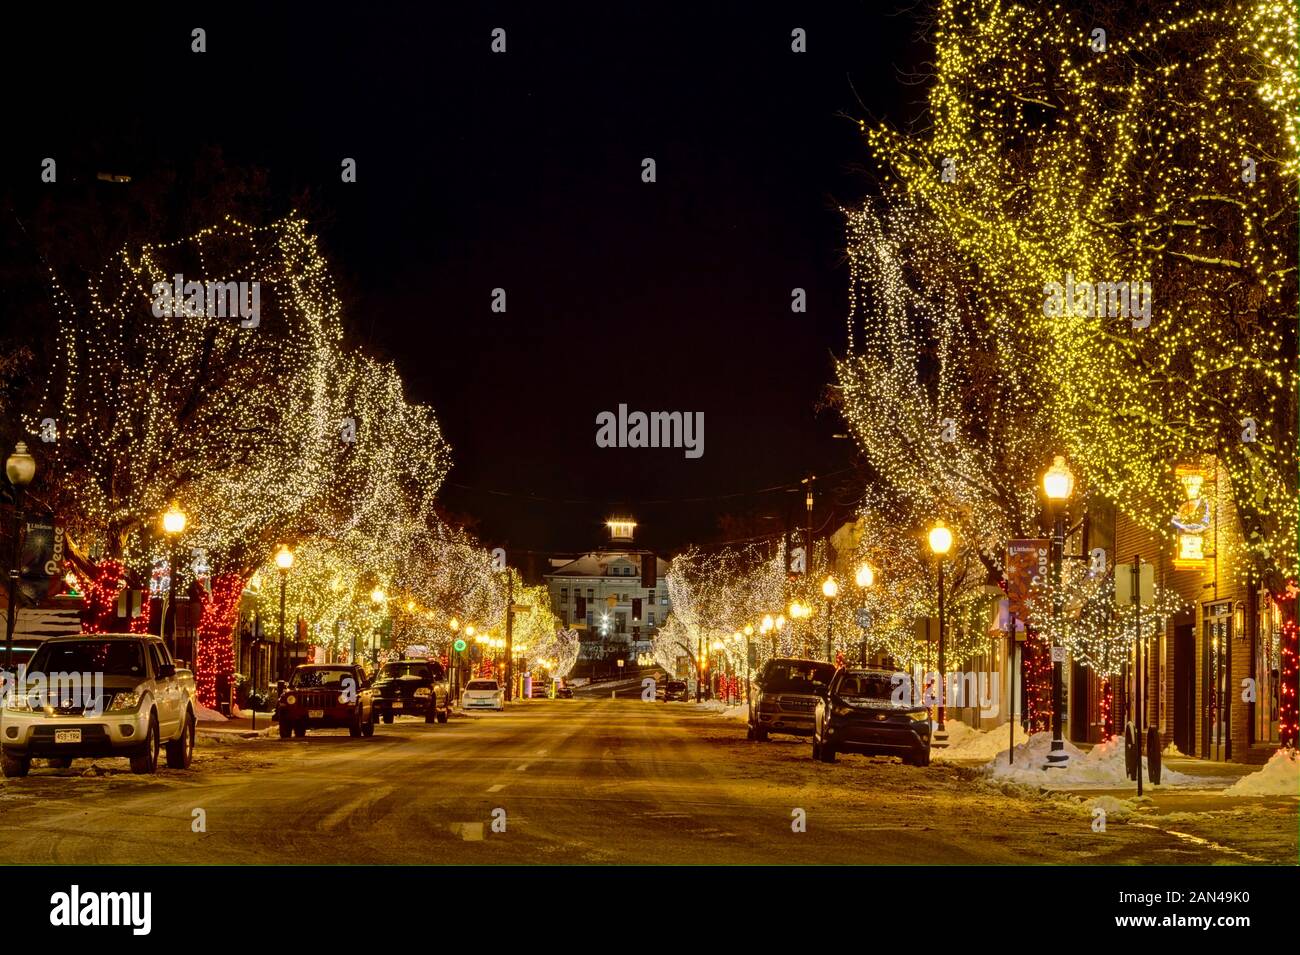 Downtown Littleton Colorado decorated for the holiday season. Stock Photo